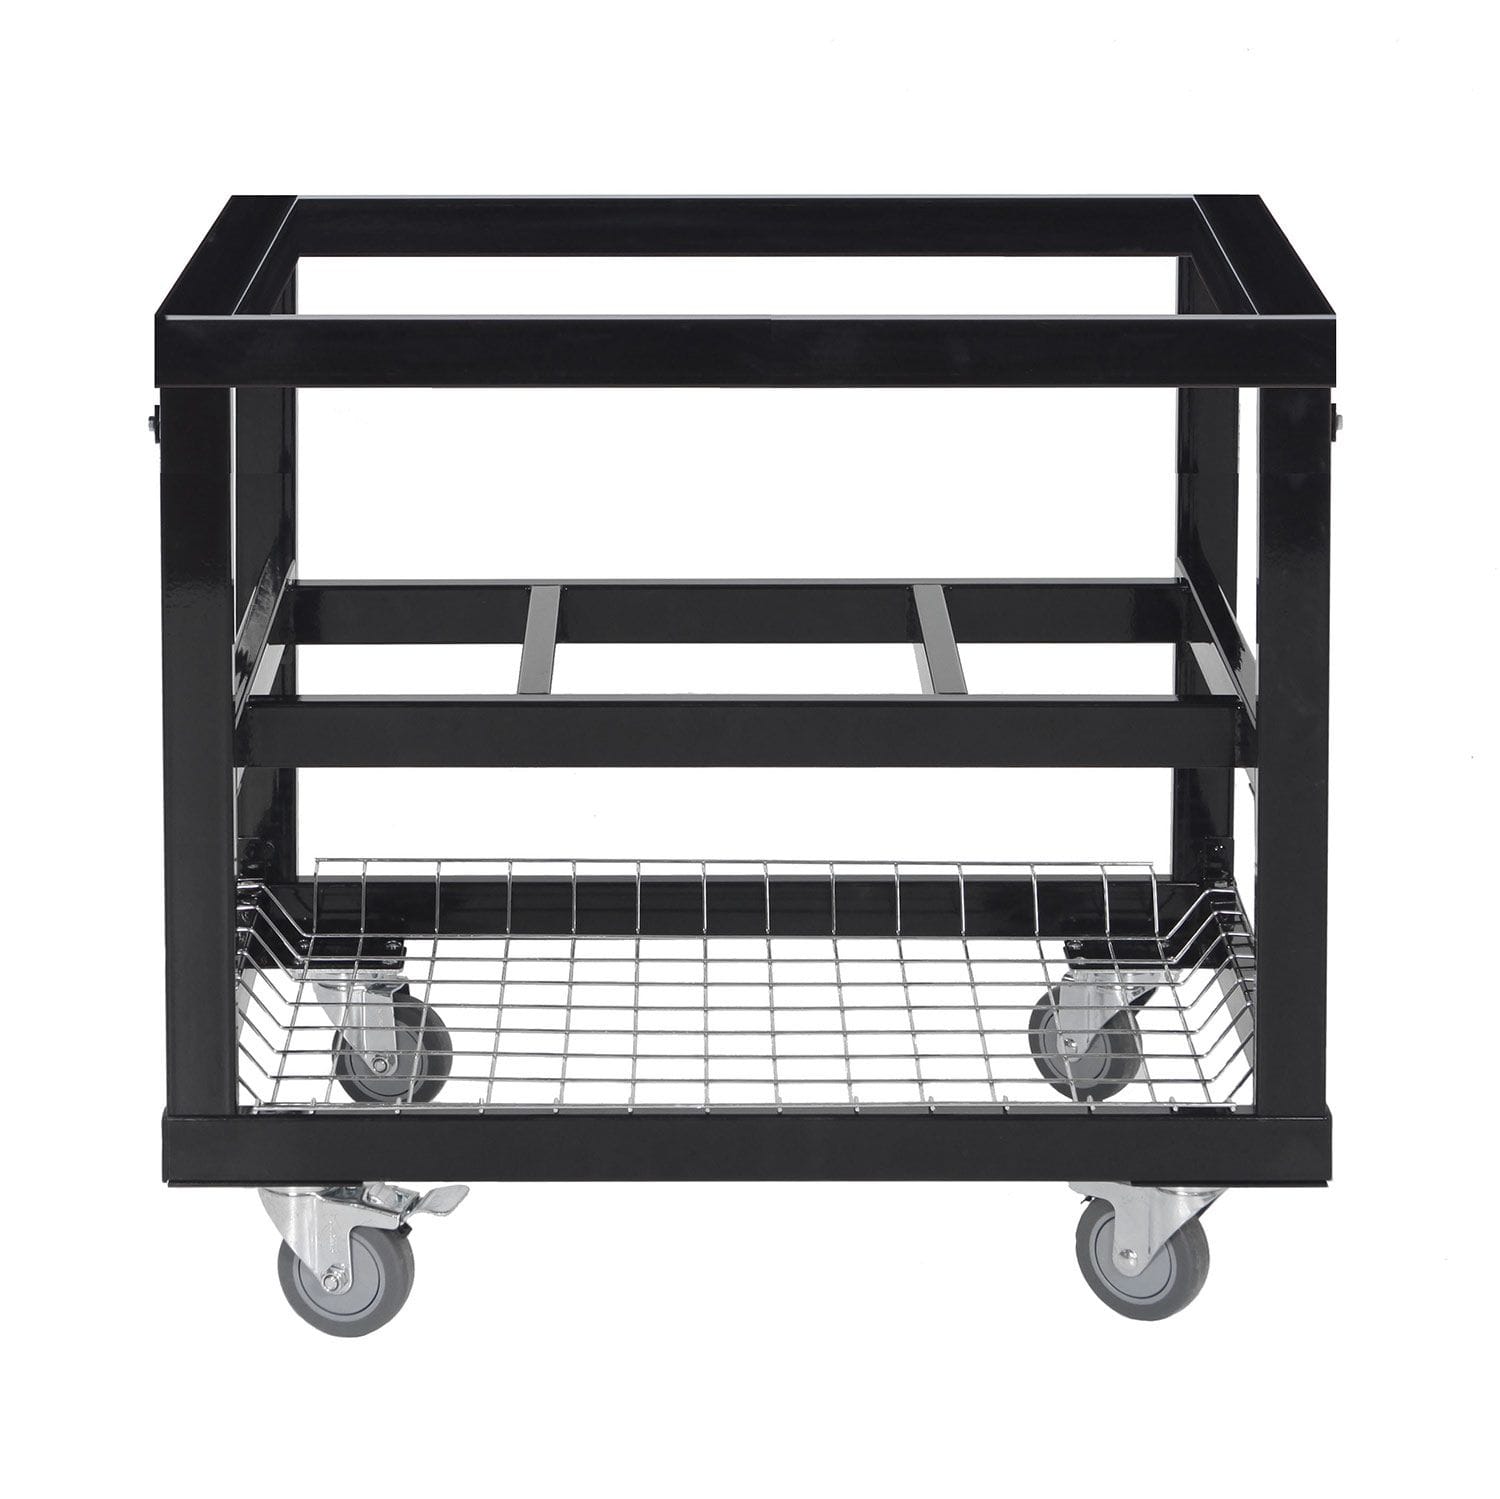 Primo Accessories Oval LG 300 / Oval XL 400 Primo Grill Cart Base with Basket for Oval LG 300, XL 400, & Oval JR 200 / PG00368 or PG00318